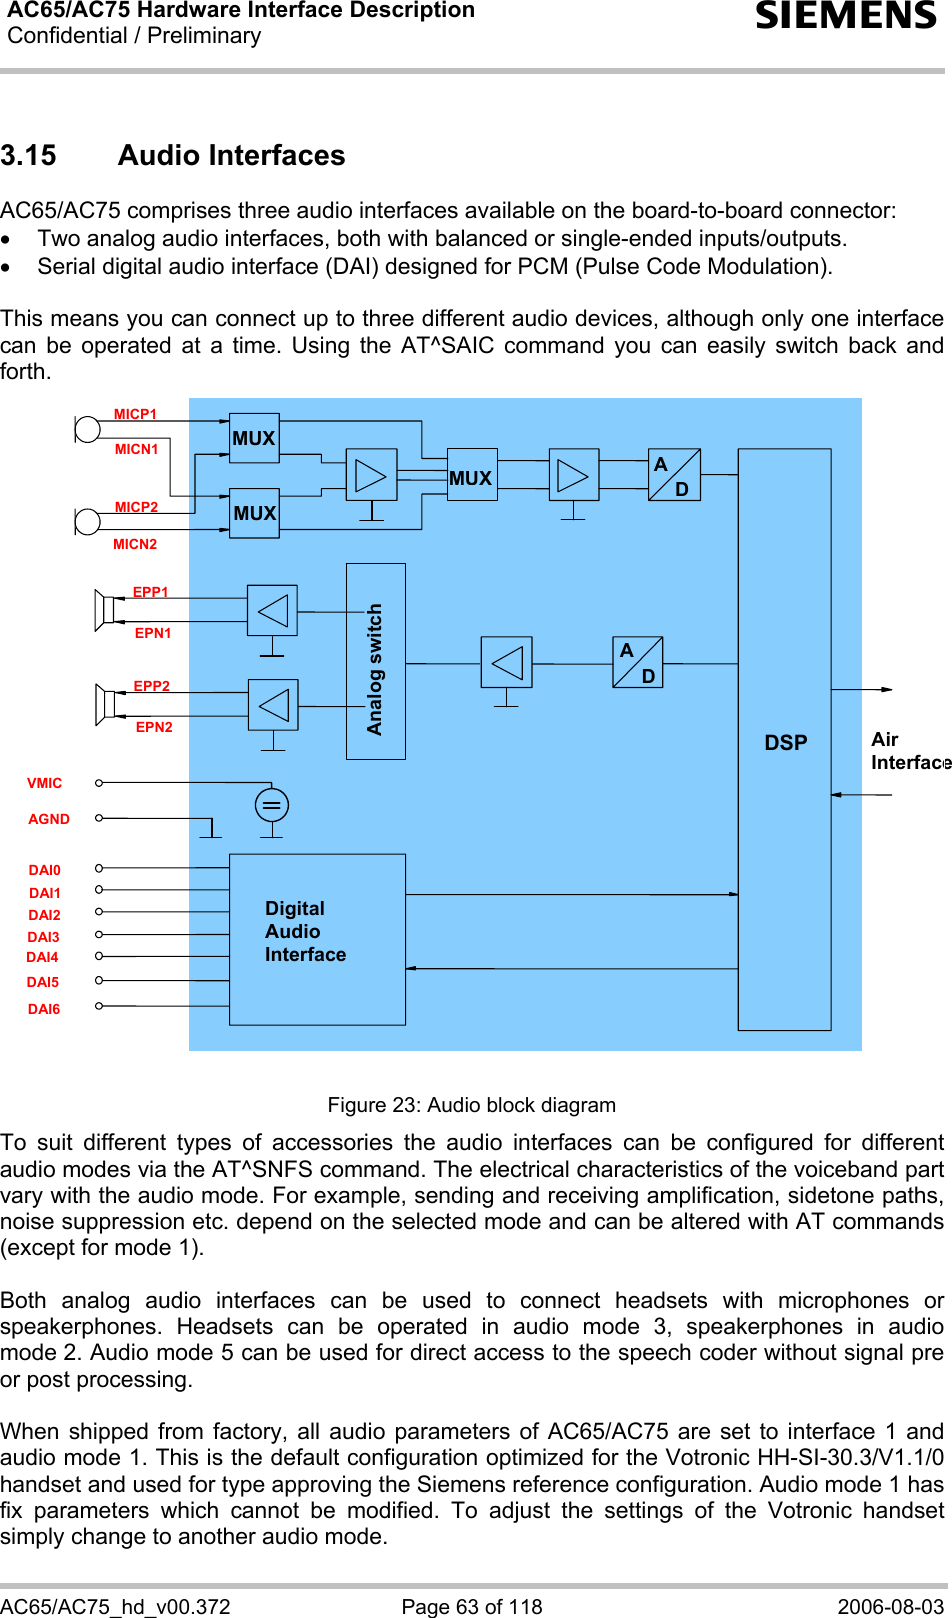 AC65/AC75 Hardware Interface Description Confidential / Preliminary   s AC65/AC75_hd_v00.372  Page 63 of 118  2006-08-03 3.15 Audio Interfaces AC65/AC75 comprises three audio interfaces available on the board-to-board connector:  •  Two analog audio interfaces, both with balanced or single-ended inputs/outputs. •  Serial digital audio interface (DAI) designed for PCM (Pulse Code Modulation).  This means you can connect up to three different audio devices, although only one interface can be operated at a time. Using the AT^SAIC command you can easily switch back and forth.    Analog switch Digital Audio Interface Air InterfaceDSP MUX MUXD AMICN2 MICP2 MICN1 MICP1 DAI6 DAI5 DAI4 DAI3 DAI2 AGND DAI0 DAI1 DA EPP2 EPN2 EPP1 EPN1 VMIC MUX  Figure 23: Audio block diagram To suit different types of accessories the audio interfaces can be configured for different audio modes via the AT^SNFS command. The electrical characteristics of the voiceband part vary with the audio mode. For example, sending and receiving amplification, sidetone paths, noise suppression etc. depend on the selected mode and can be altered with AT commands (except for mode 1).  Both analog audio interfaces can be used to connect headsets with microphones or speakerphones. Headsets can be operated in audio mode 3, speakerphones in audio mode 2. Audio mode 5 can be used for direct access to the speech coder without signal pre or post processing.  When shipped from factory, all audio parameters of AC65/AC75 are set to interface 1 and audio mode 1. This is the default configuration optimized for the Votronic HH-SI-30.3/V1.1/0 handset and used for type approving the Siemens reference configuration. Audio mode 1 has fix parameters which cannot be modified. To adjust the settings of the Votronic handset simply change to another audio mode. 